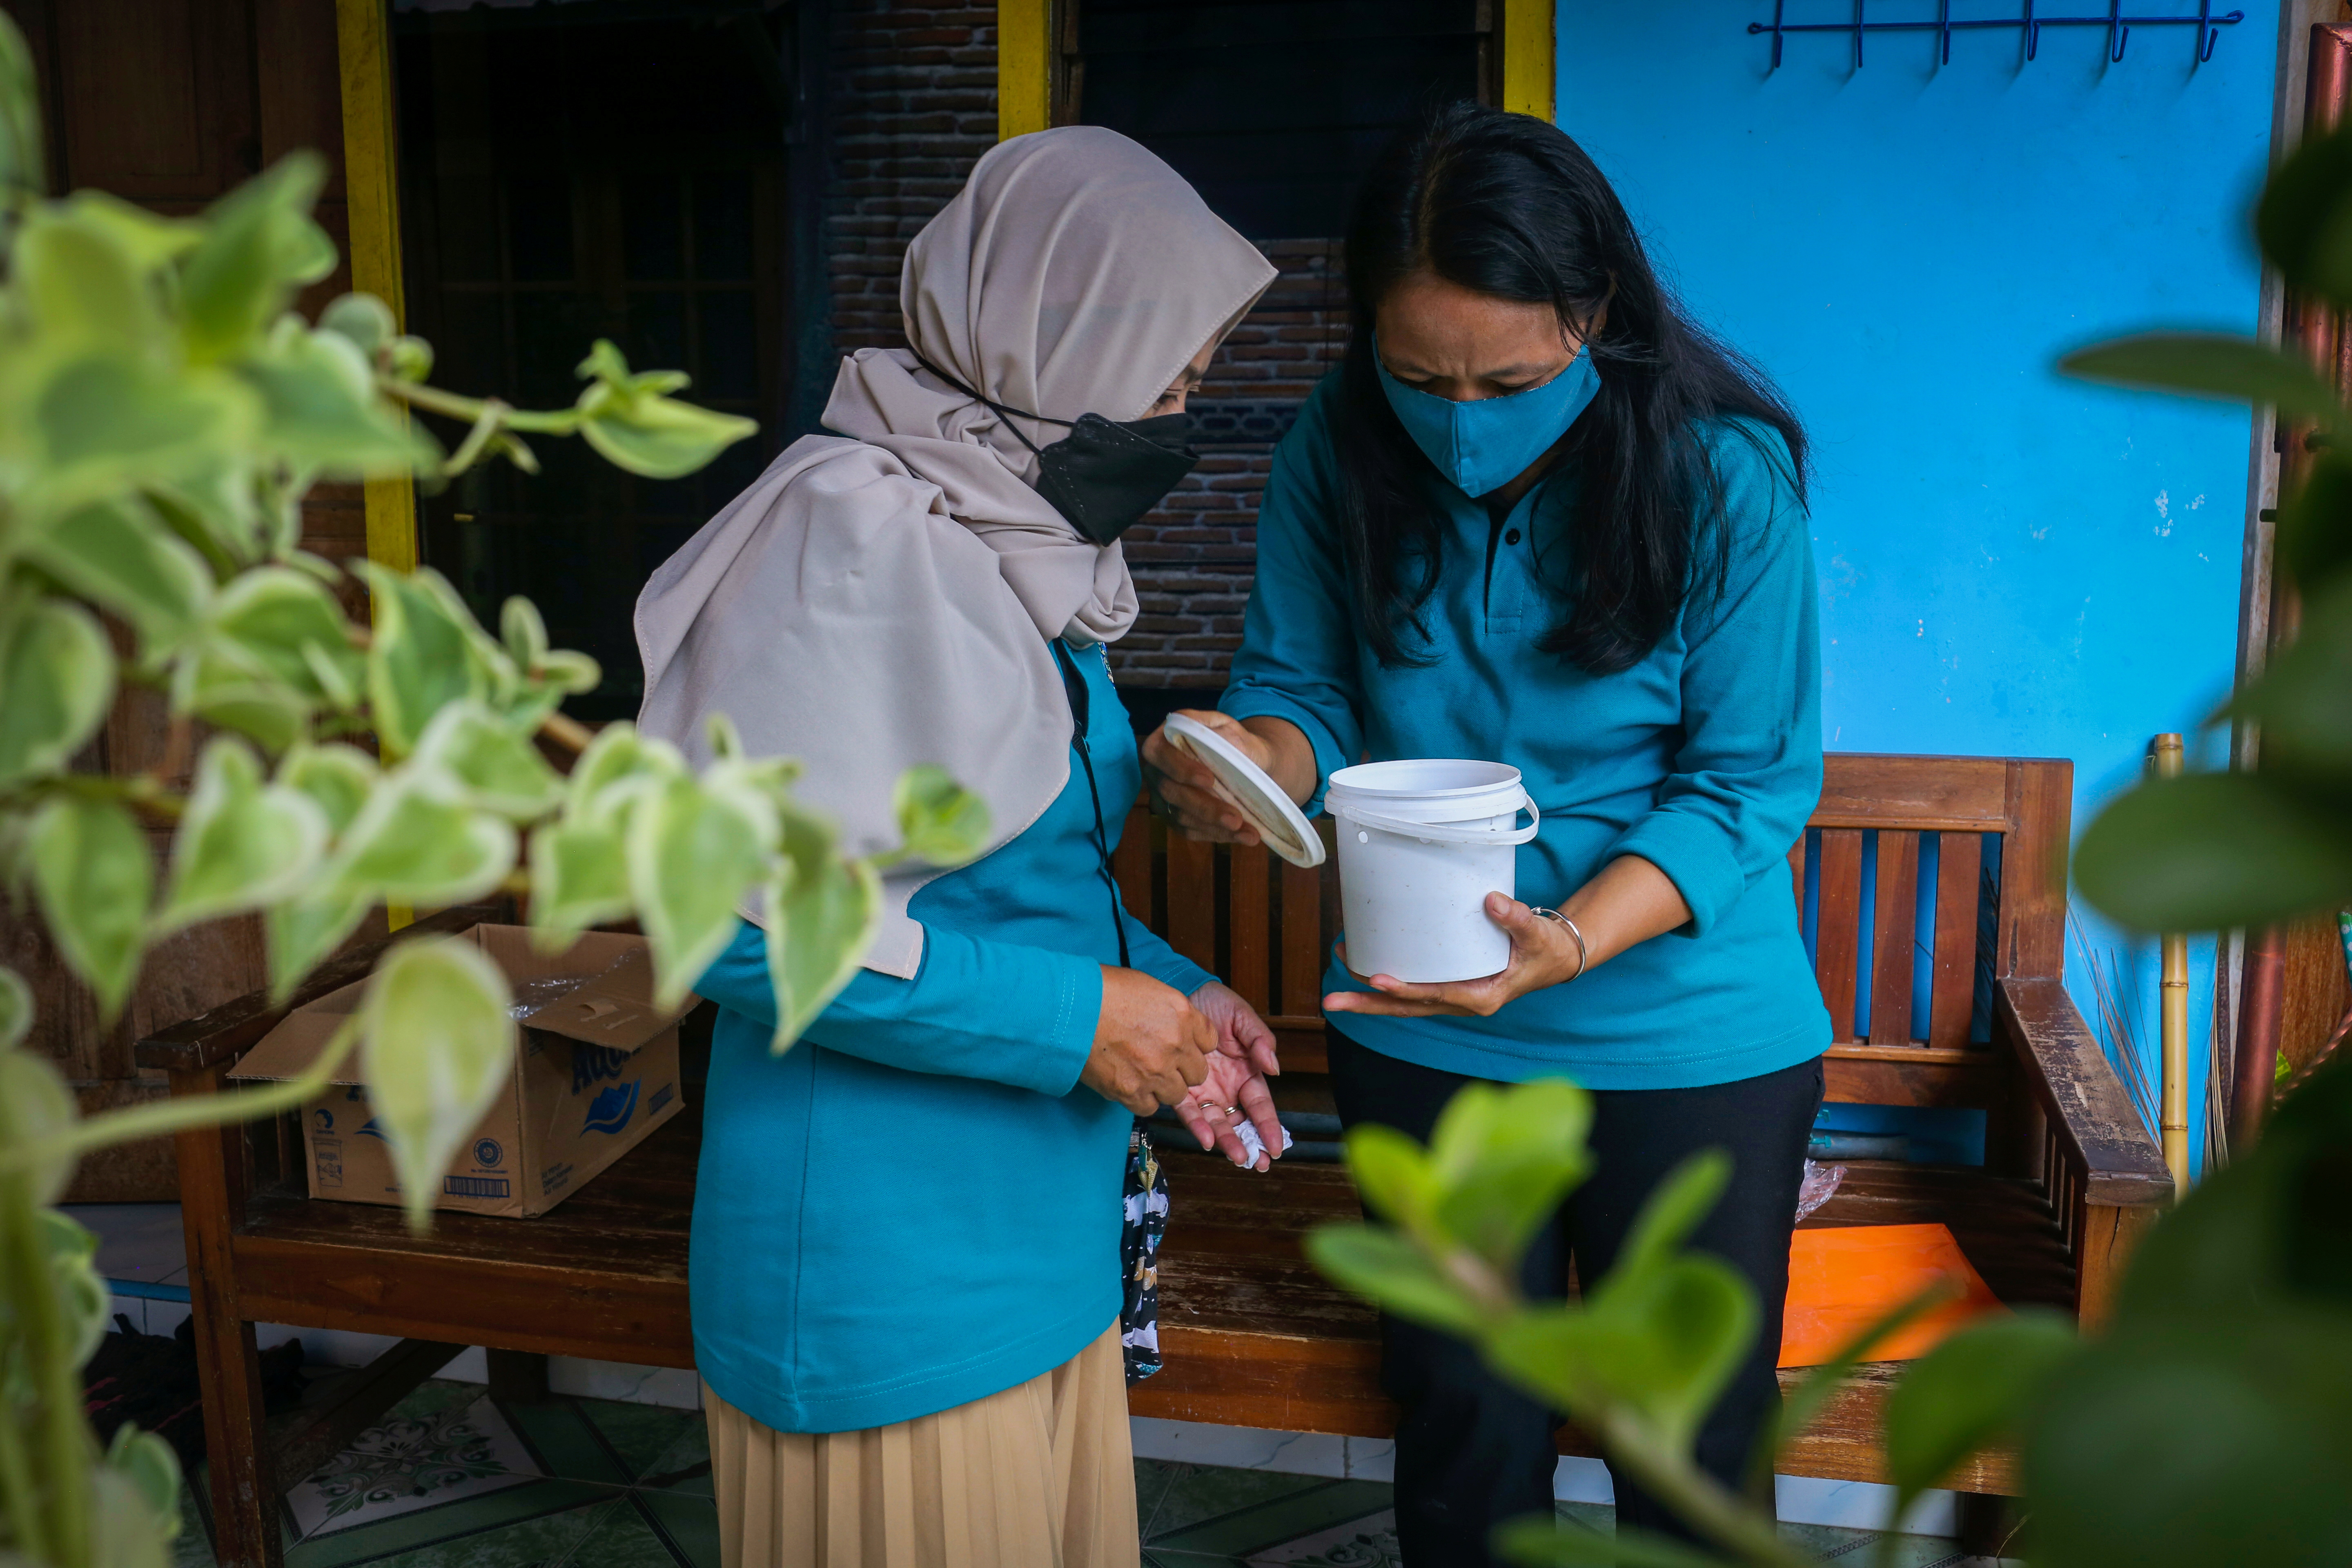 Volunteers of the World Mosquitoes Program (WMP) check the Wolbachia mosquito hatchery bucket at a house in Yogyakarta